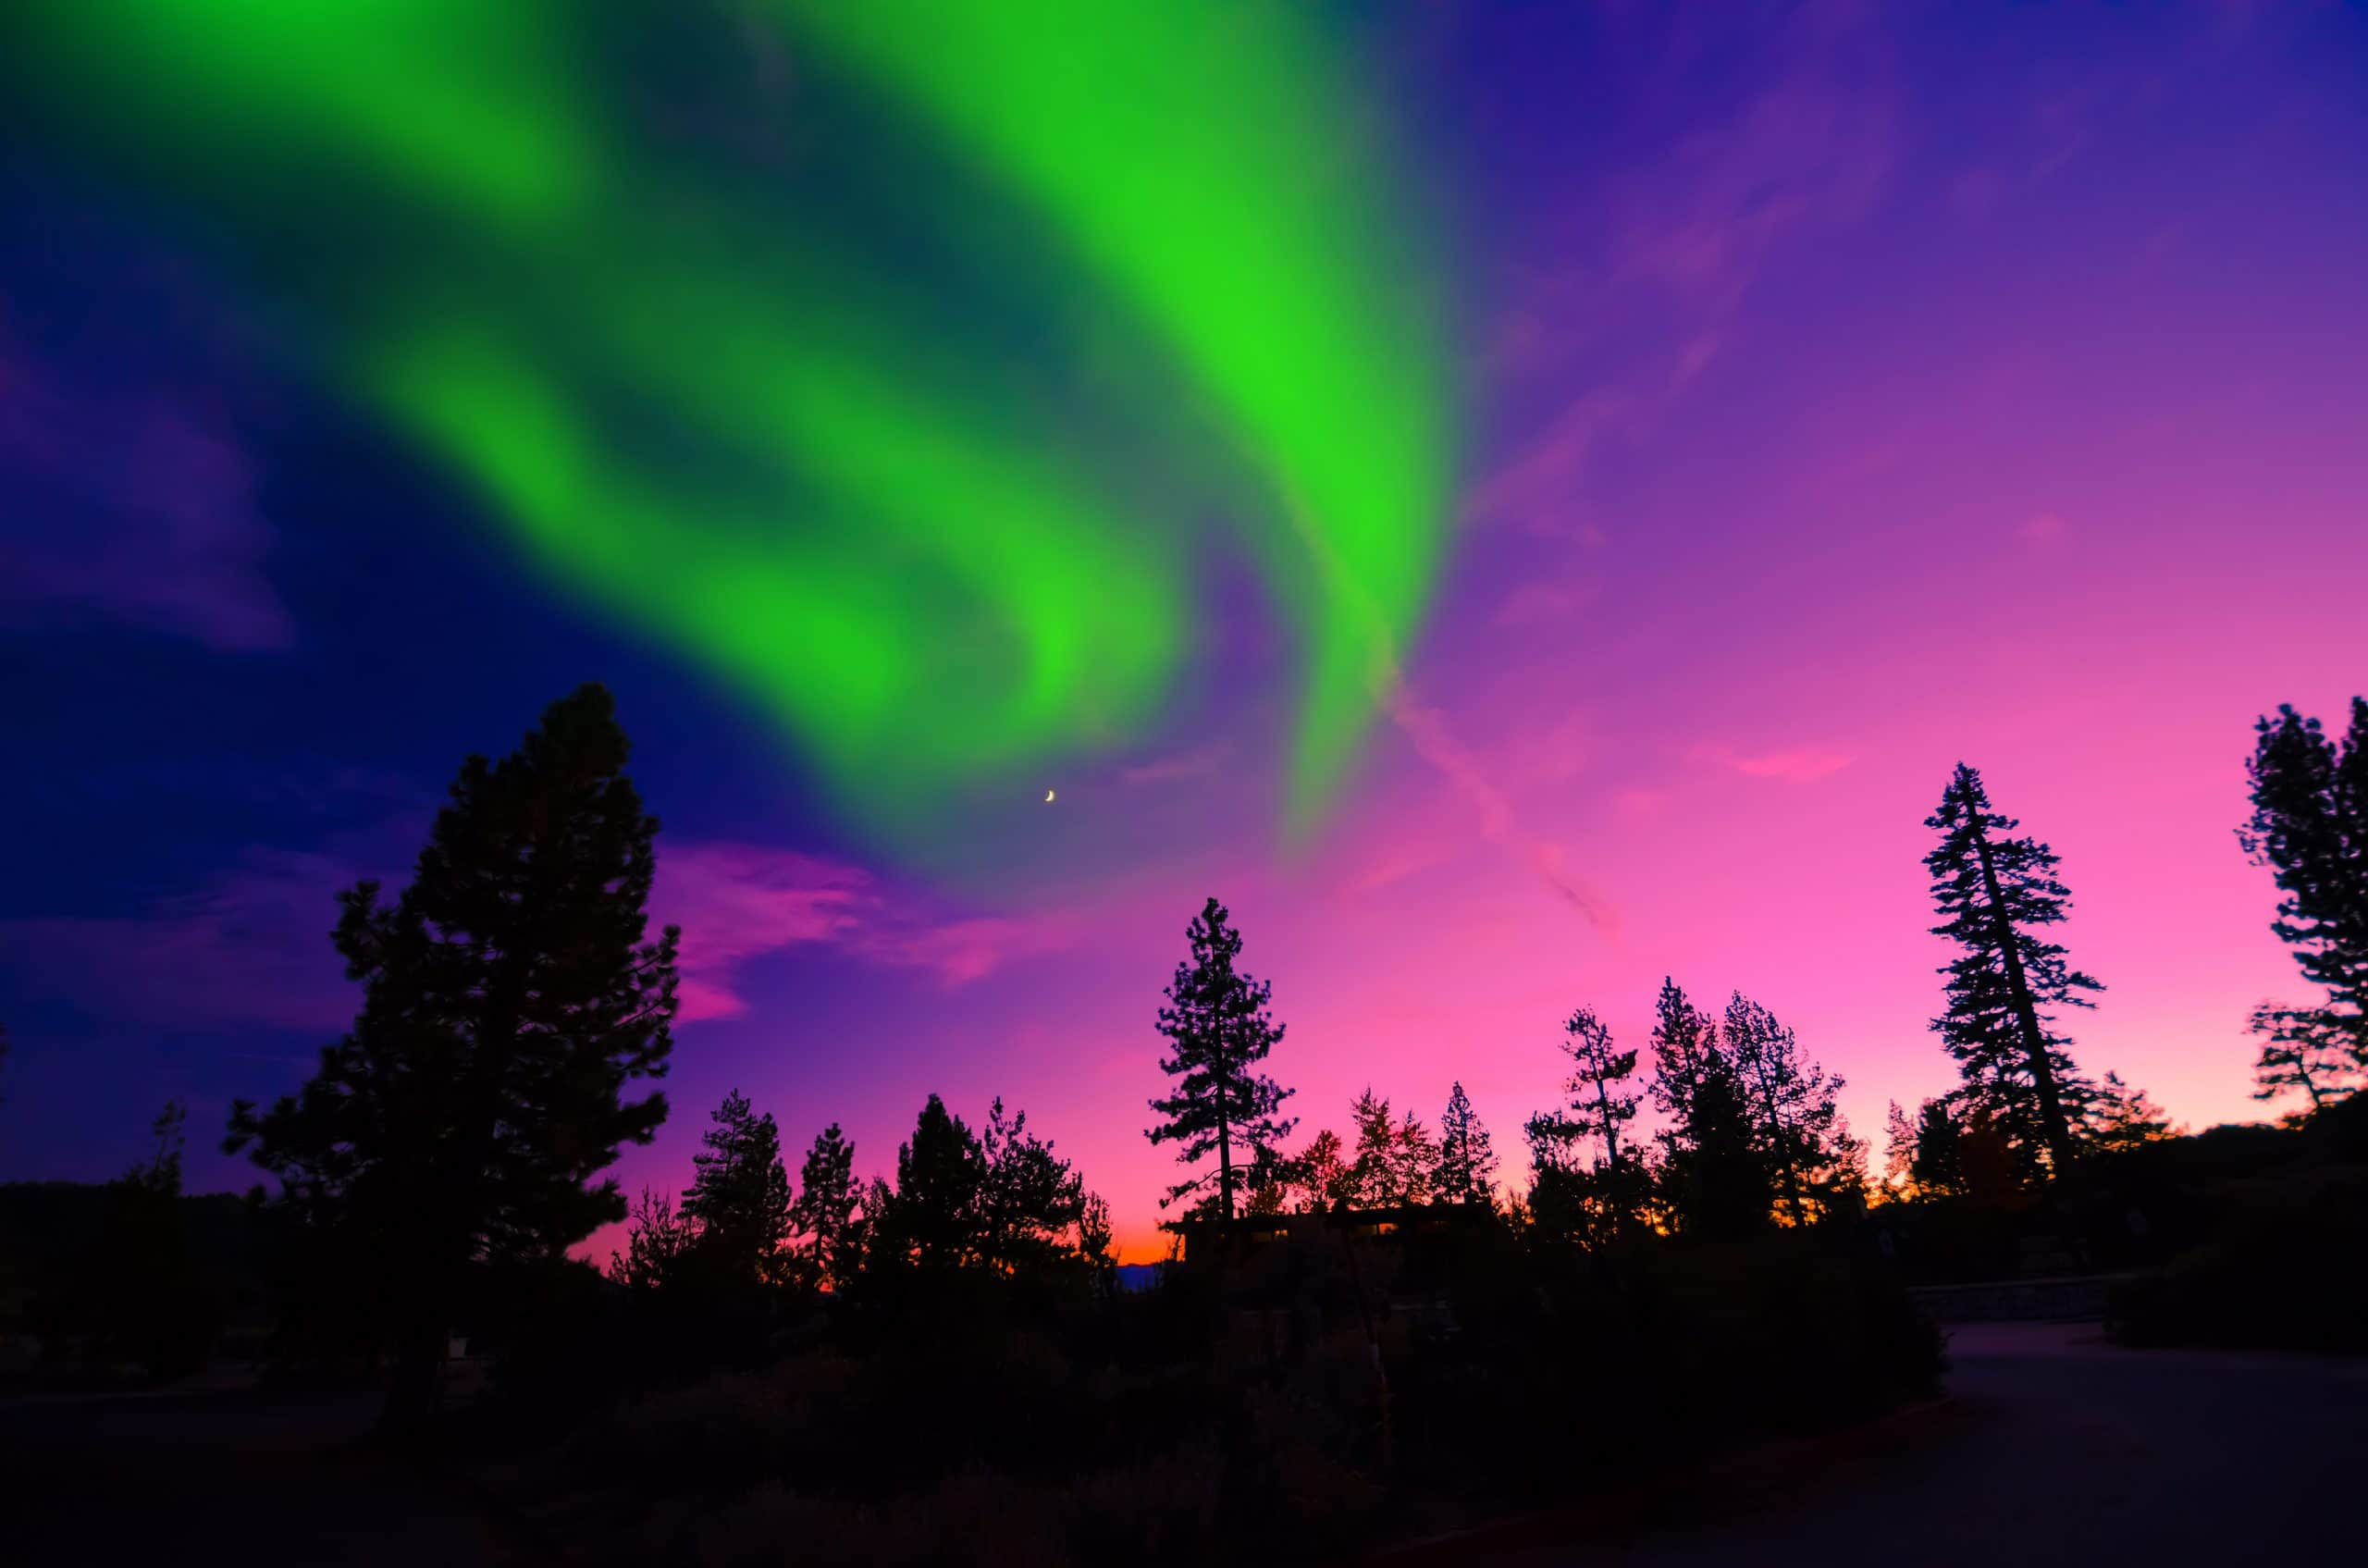 How to see the Northern Lights in Iceland - and get some great photos